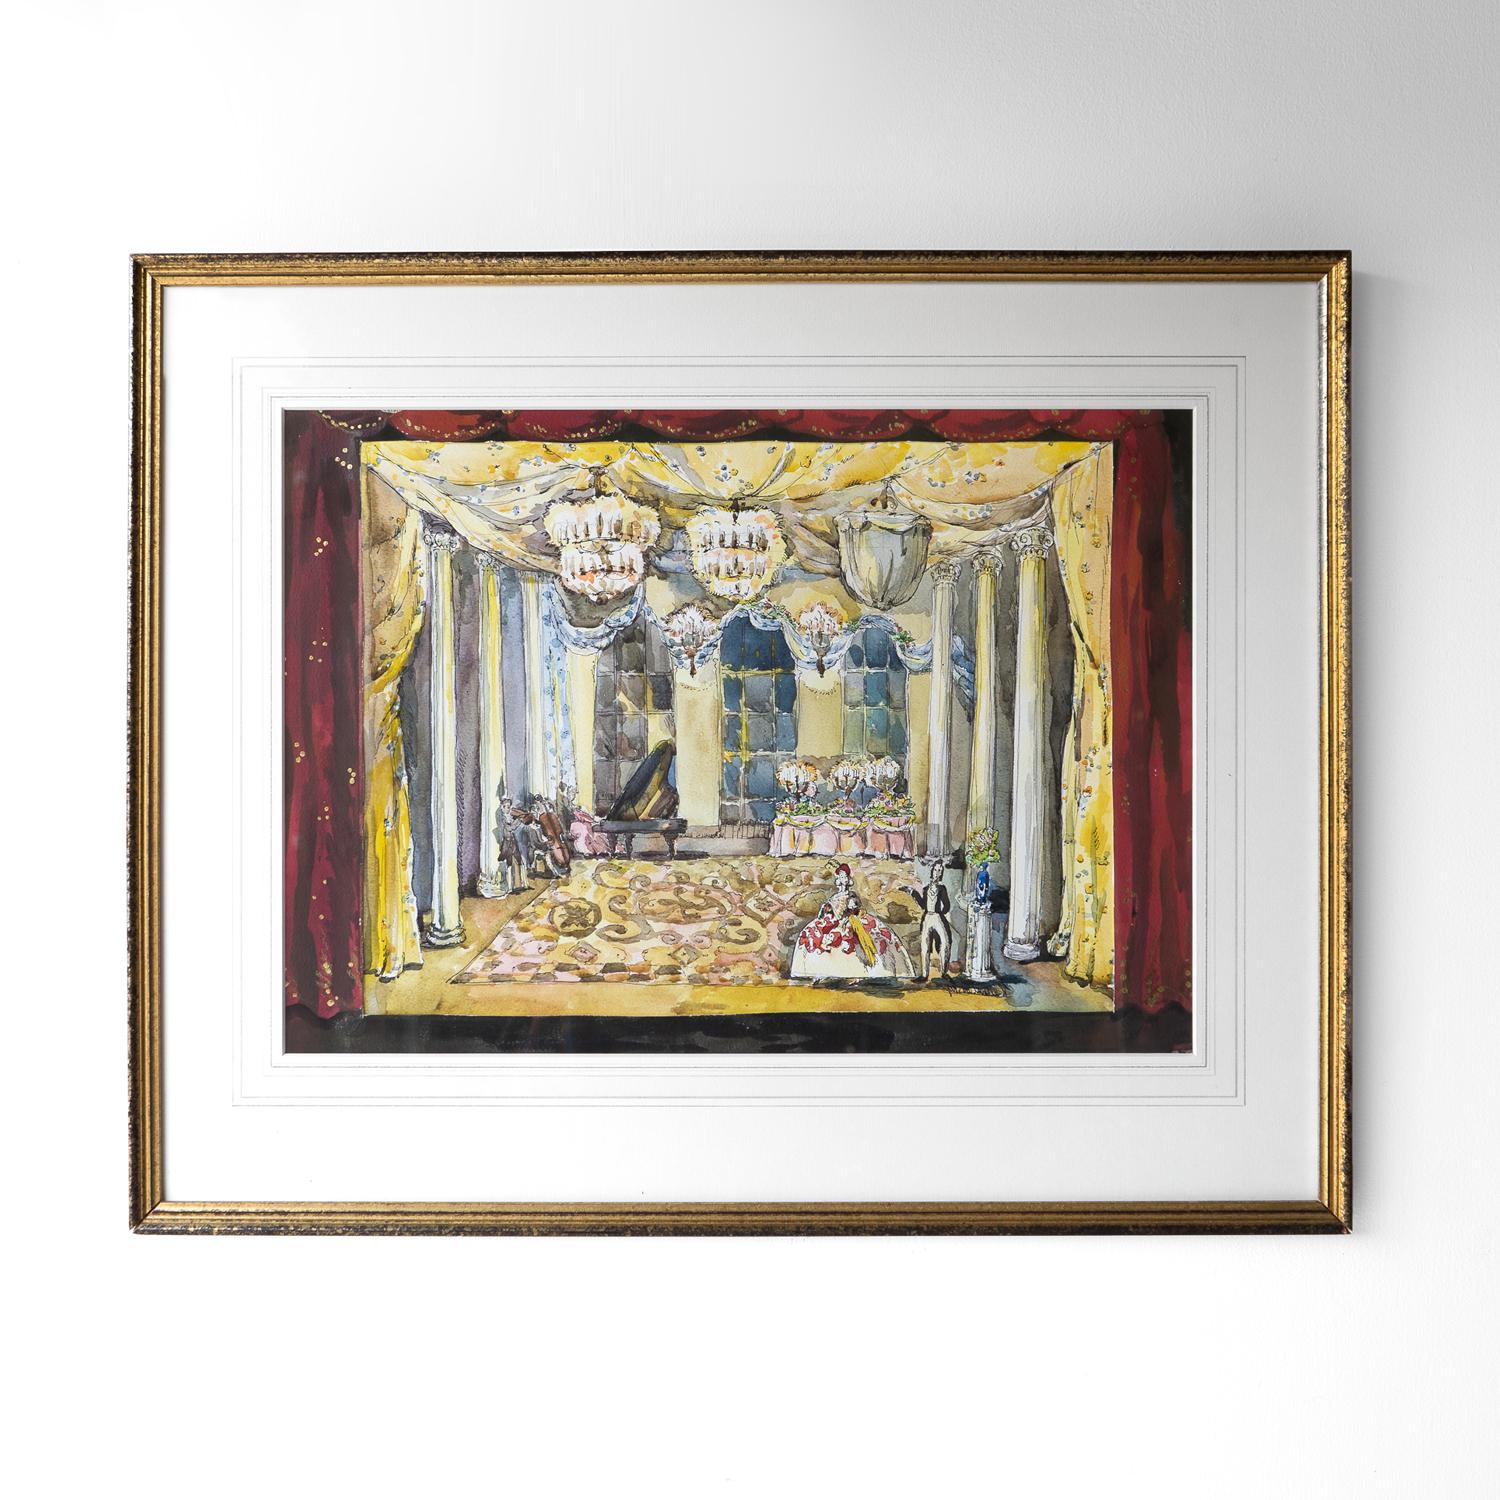 VINTAGE FRAMED THEATRICAL ARTWORK, 20th Century

An original stage design for an opera which depicts an extremely grand interior with performers in period costume as well as the musicians towards the back of the stage. All sitting within red cut-out